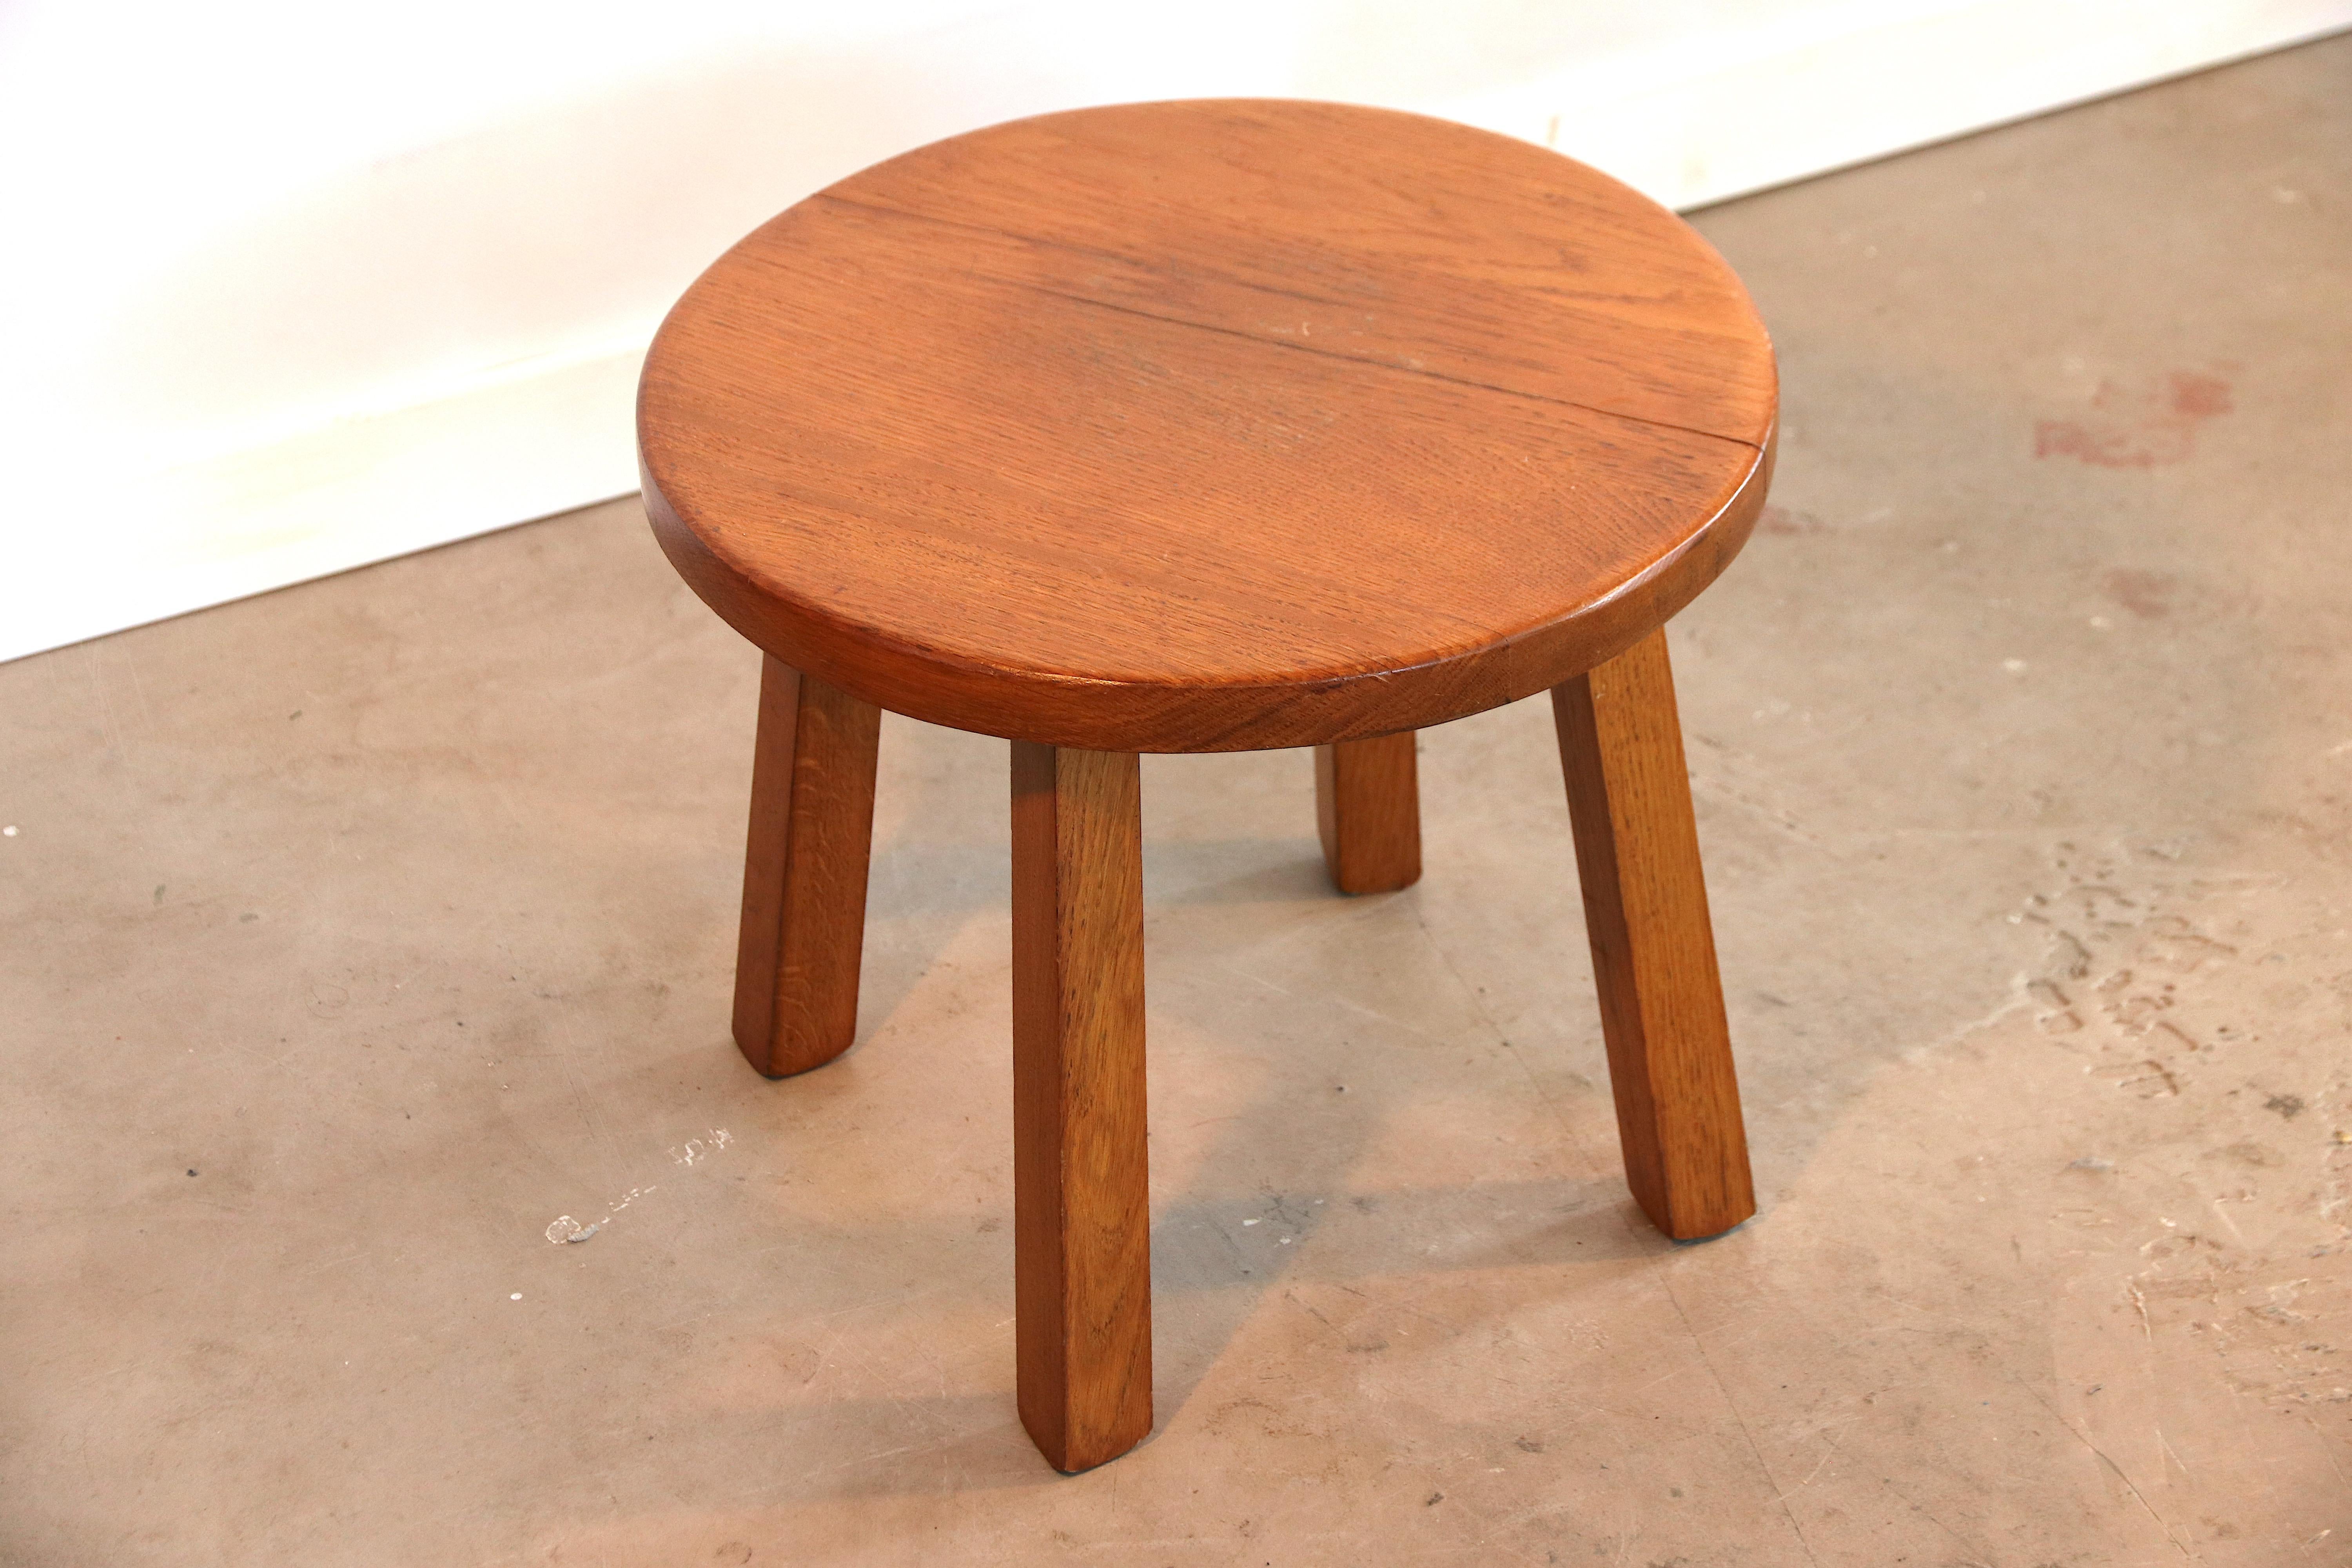 Beautifully crafted decorative piece to be used as children's stool, foot stool, hocker or side table.
Nice Brutalist style French oak.